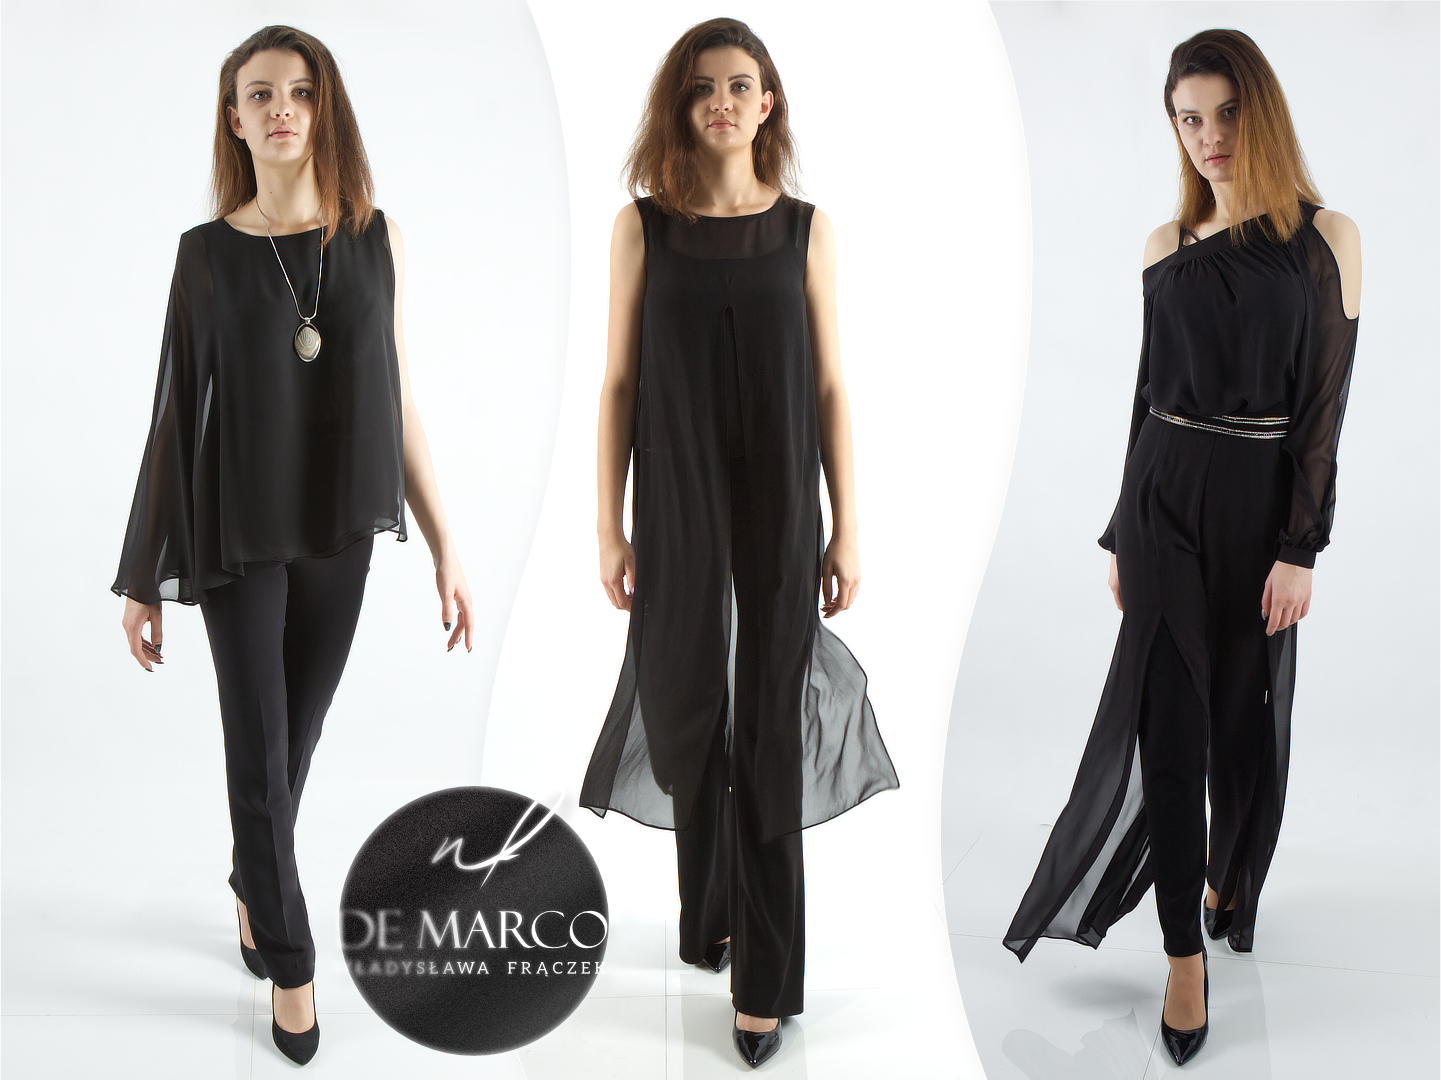 Fashionable slimming styles sewn in Poland. Exclusive clothing brand